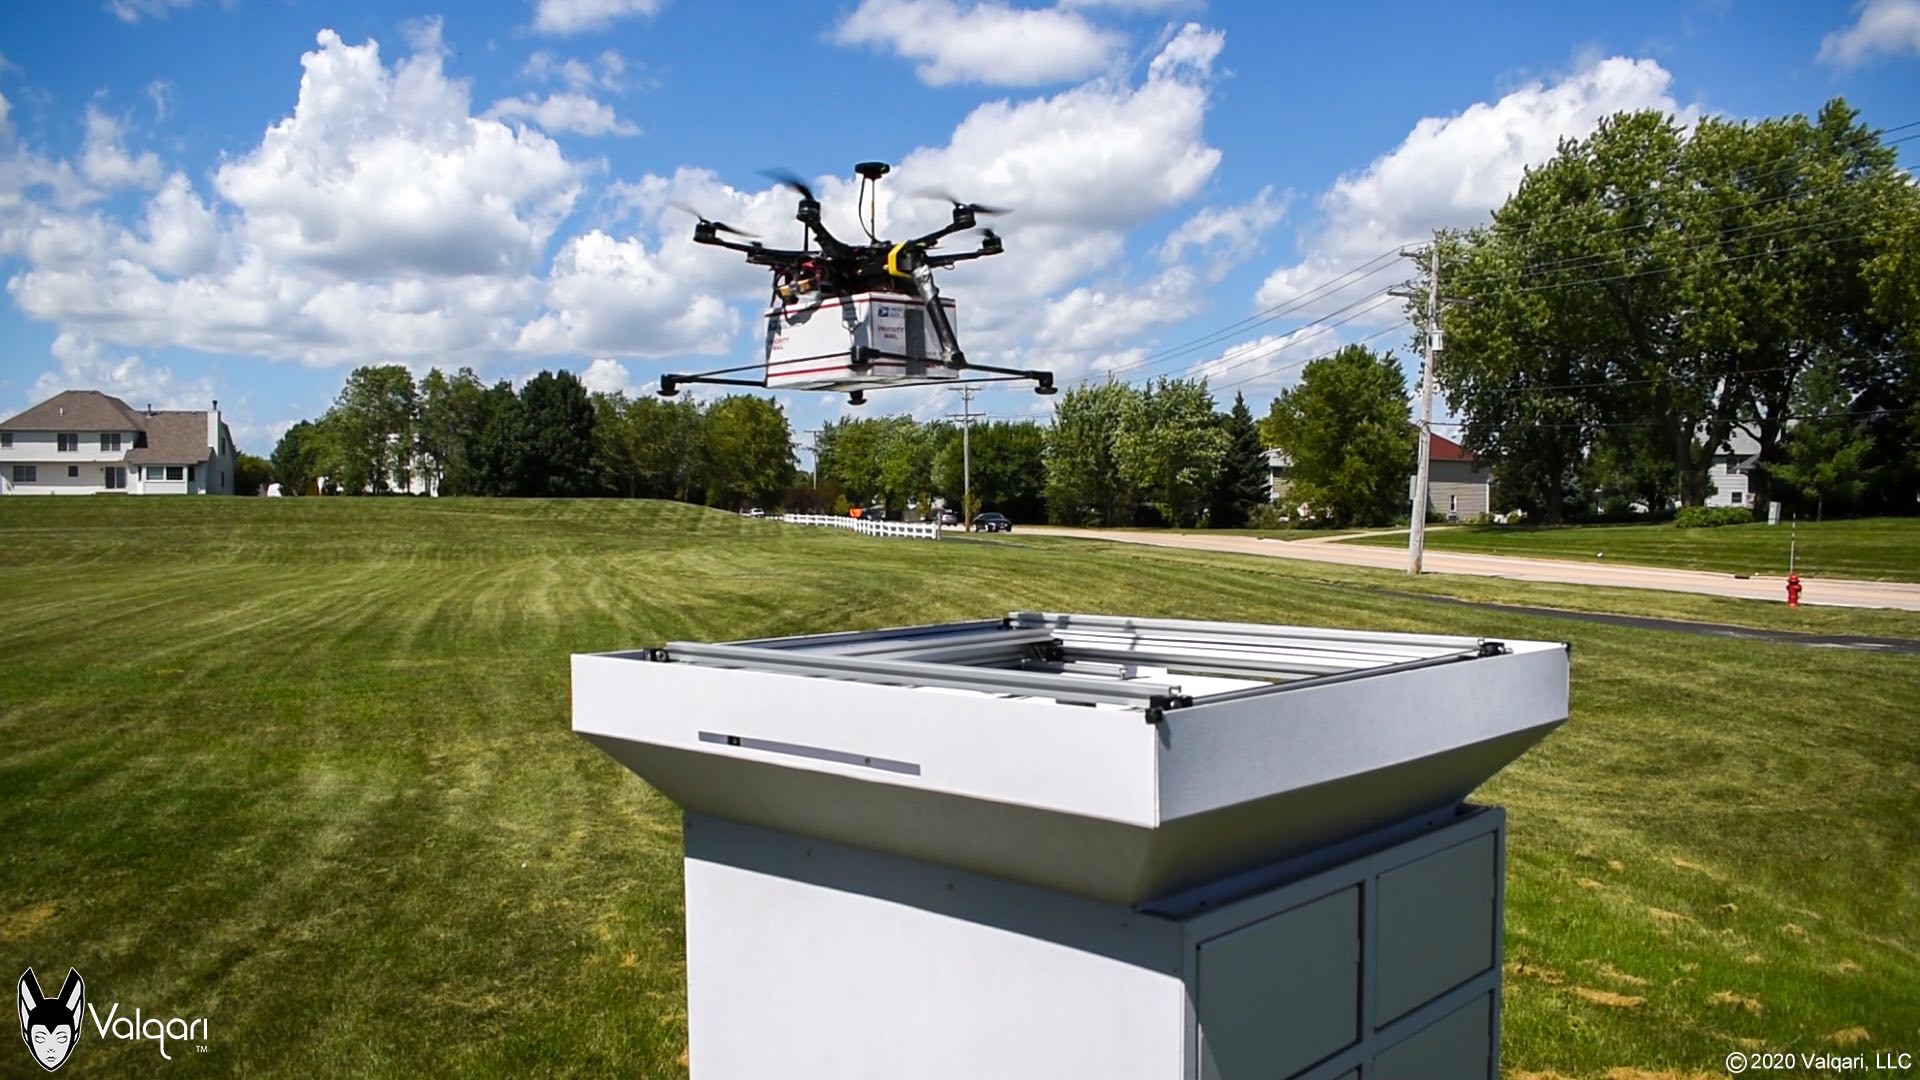 Company Says Its Drone Delivery Stations Will Be Essential For Last-Mile Delivery